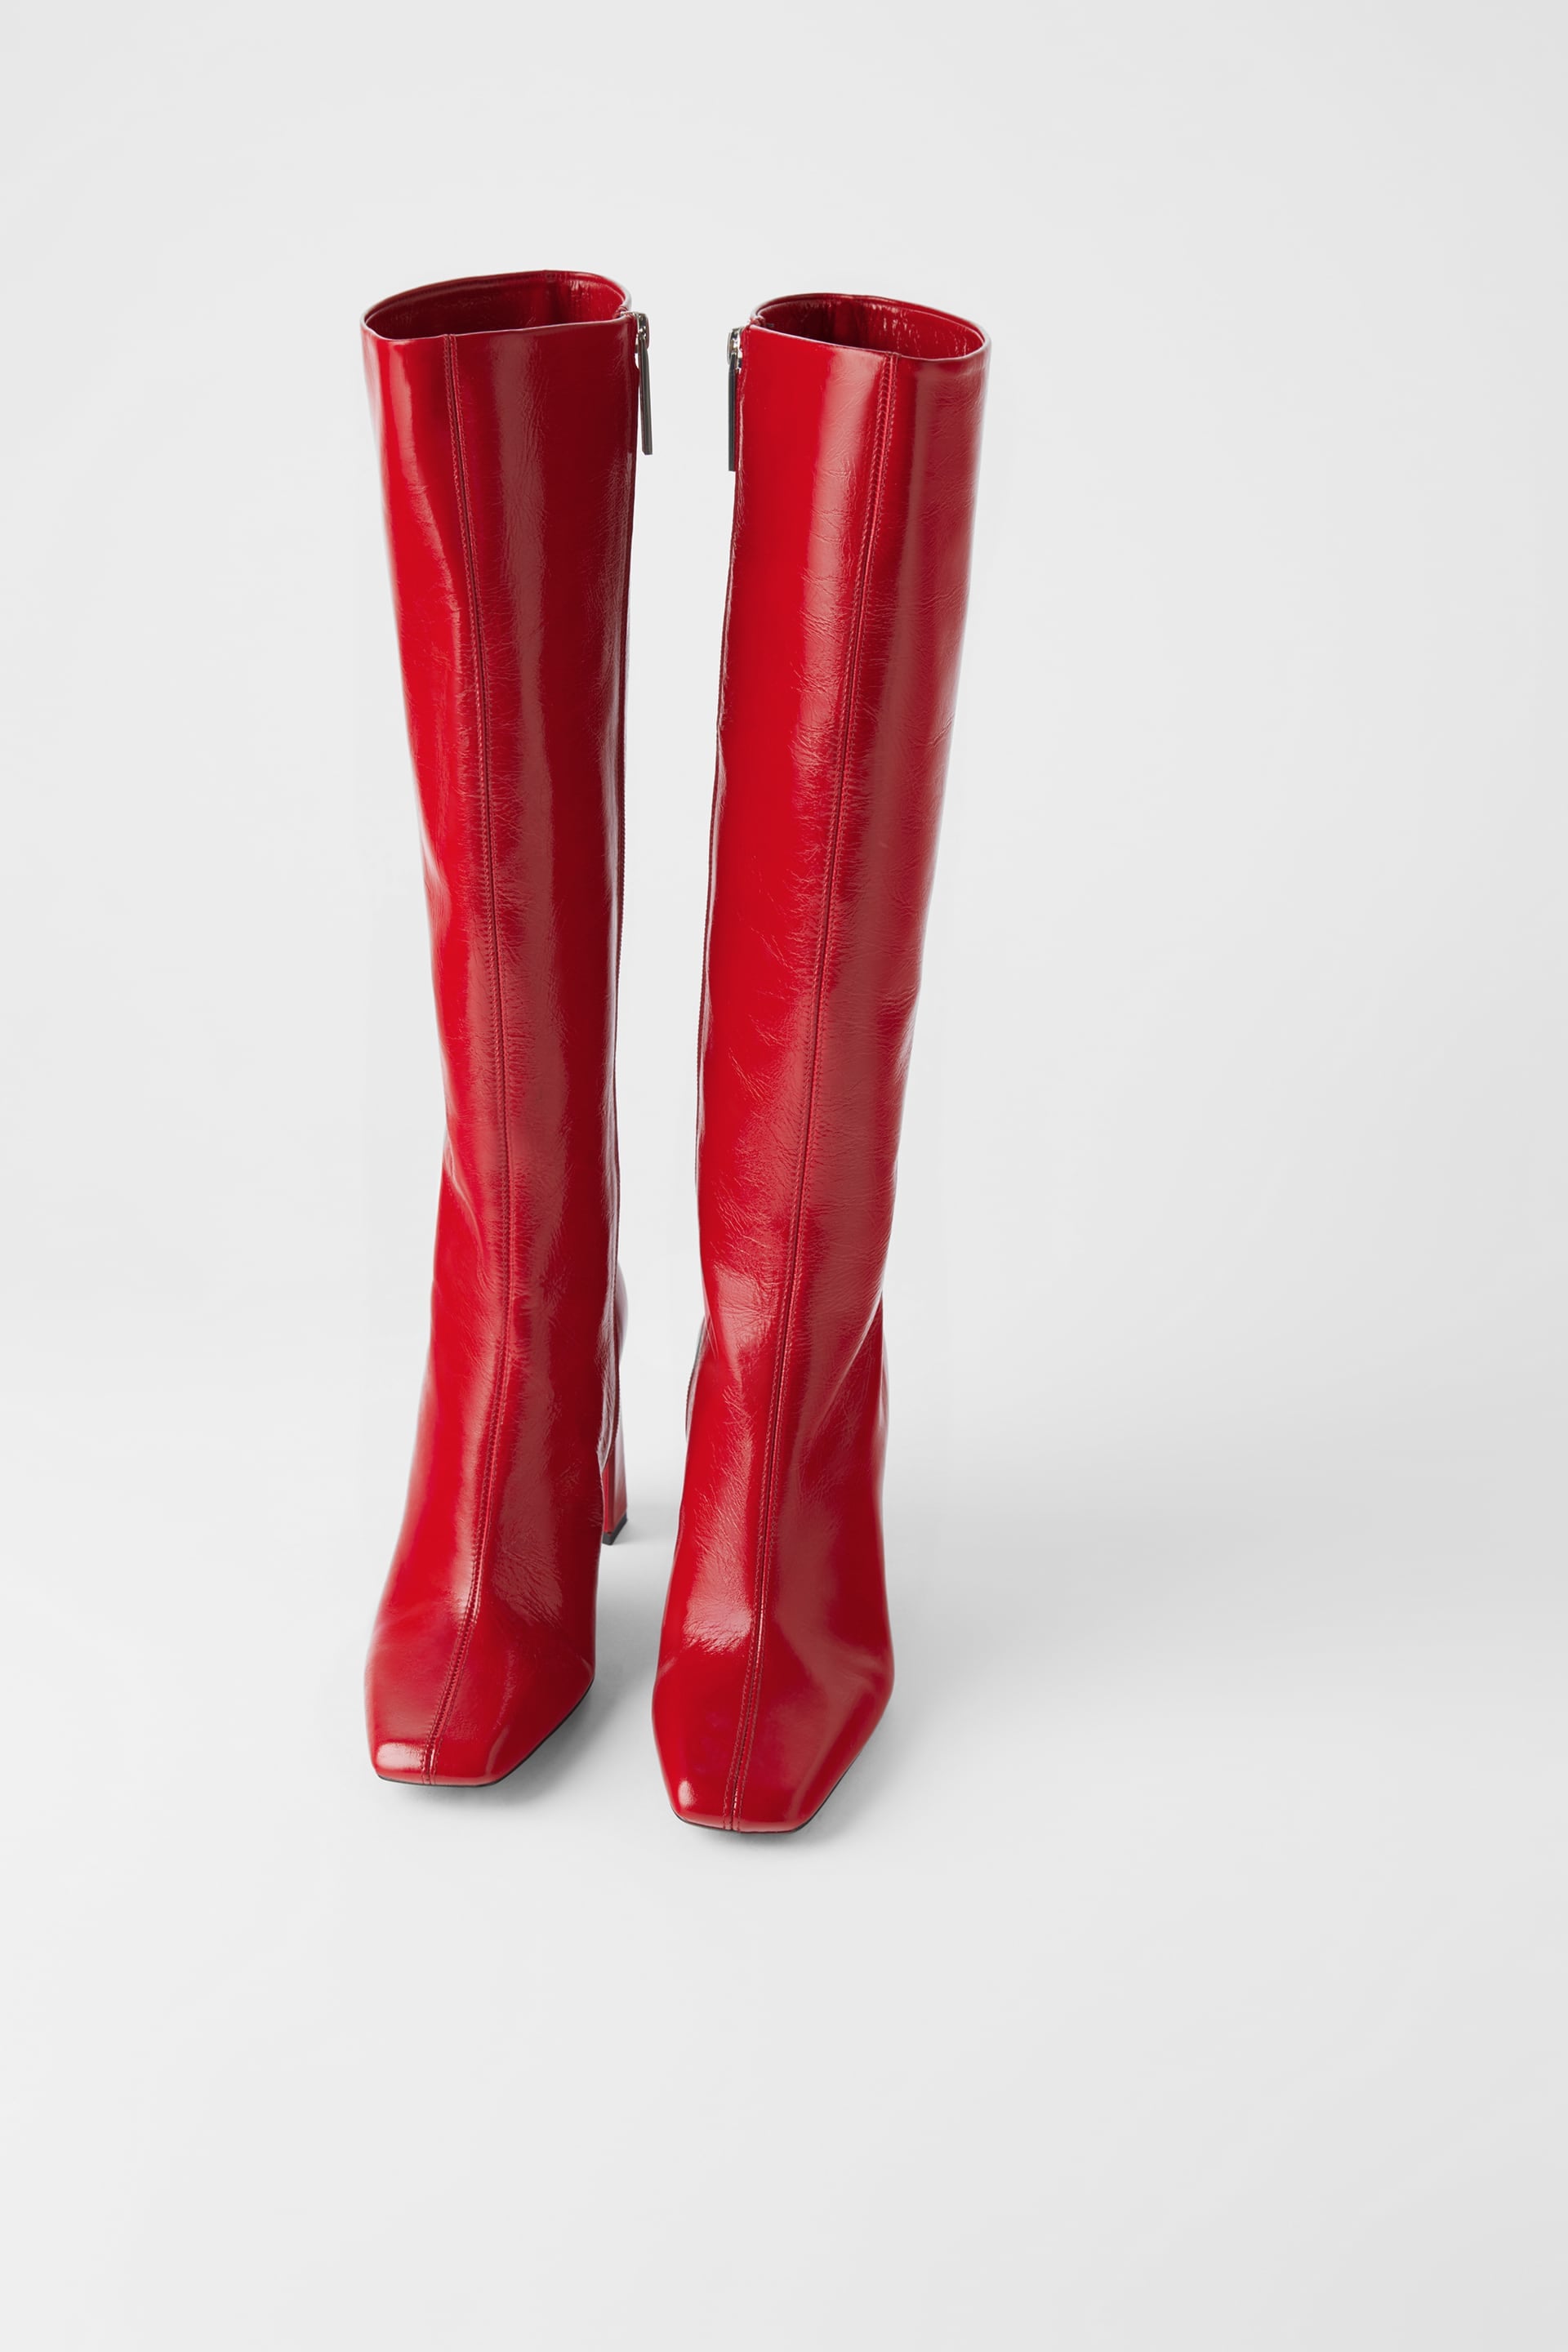 zara patent leather boots